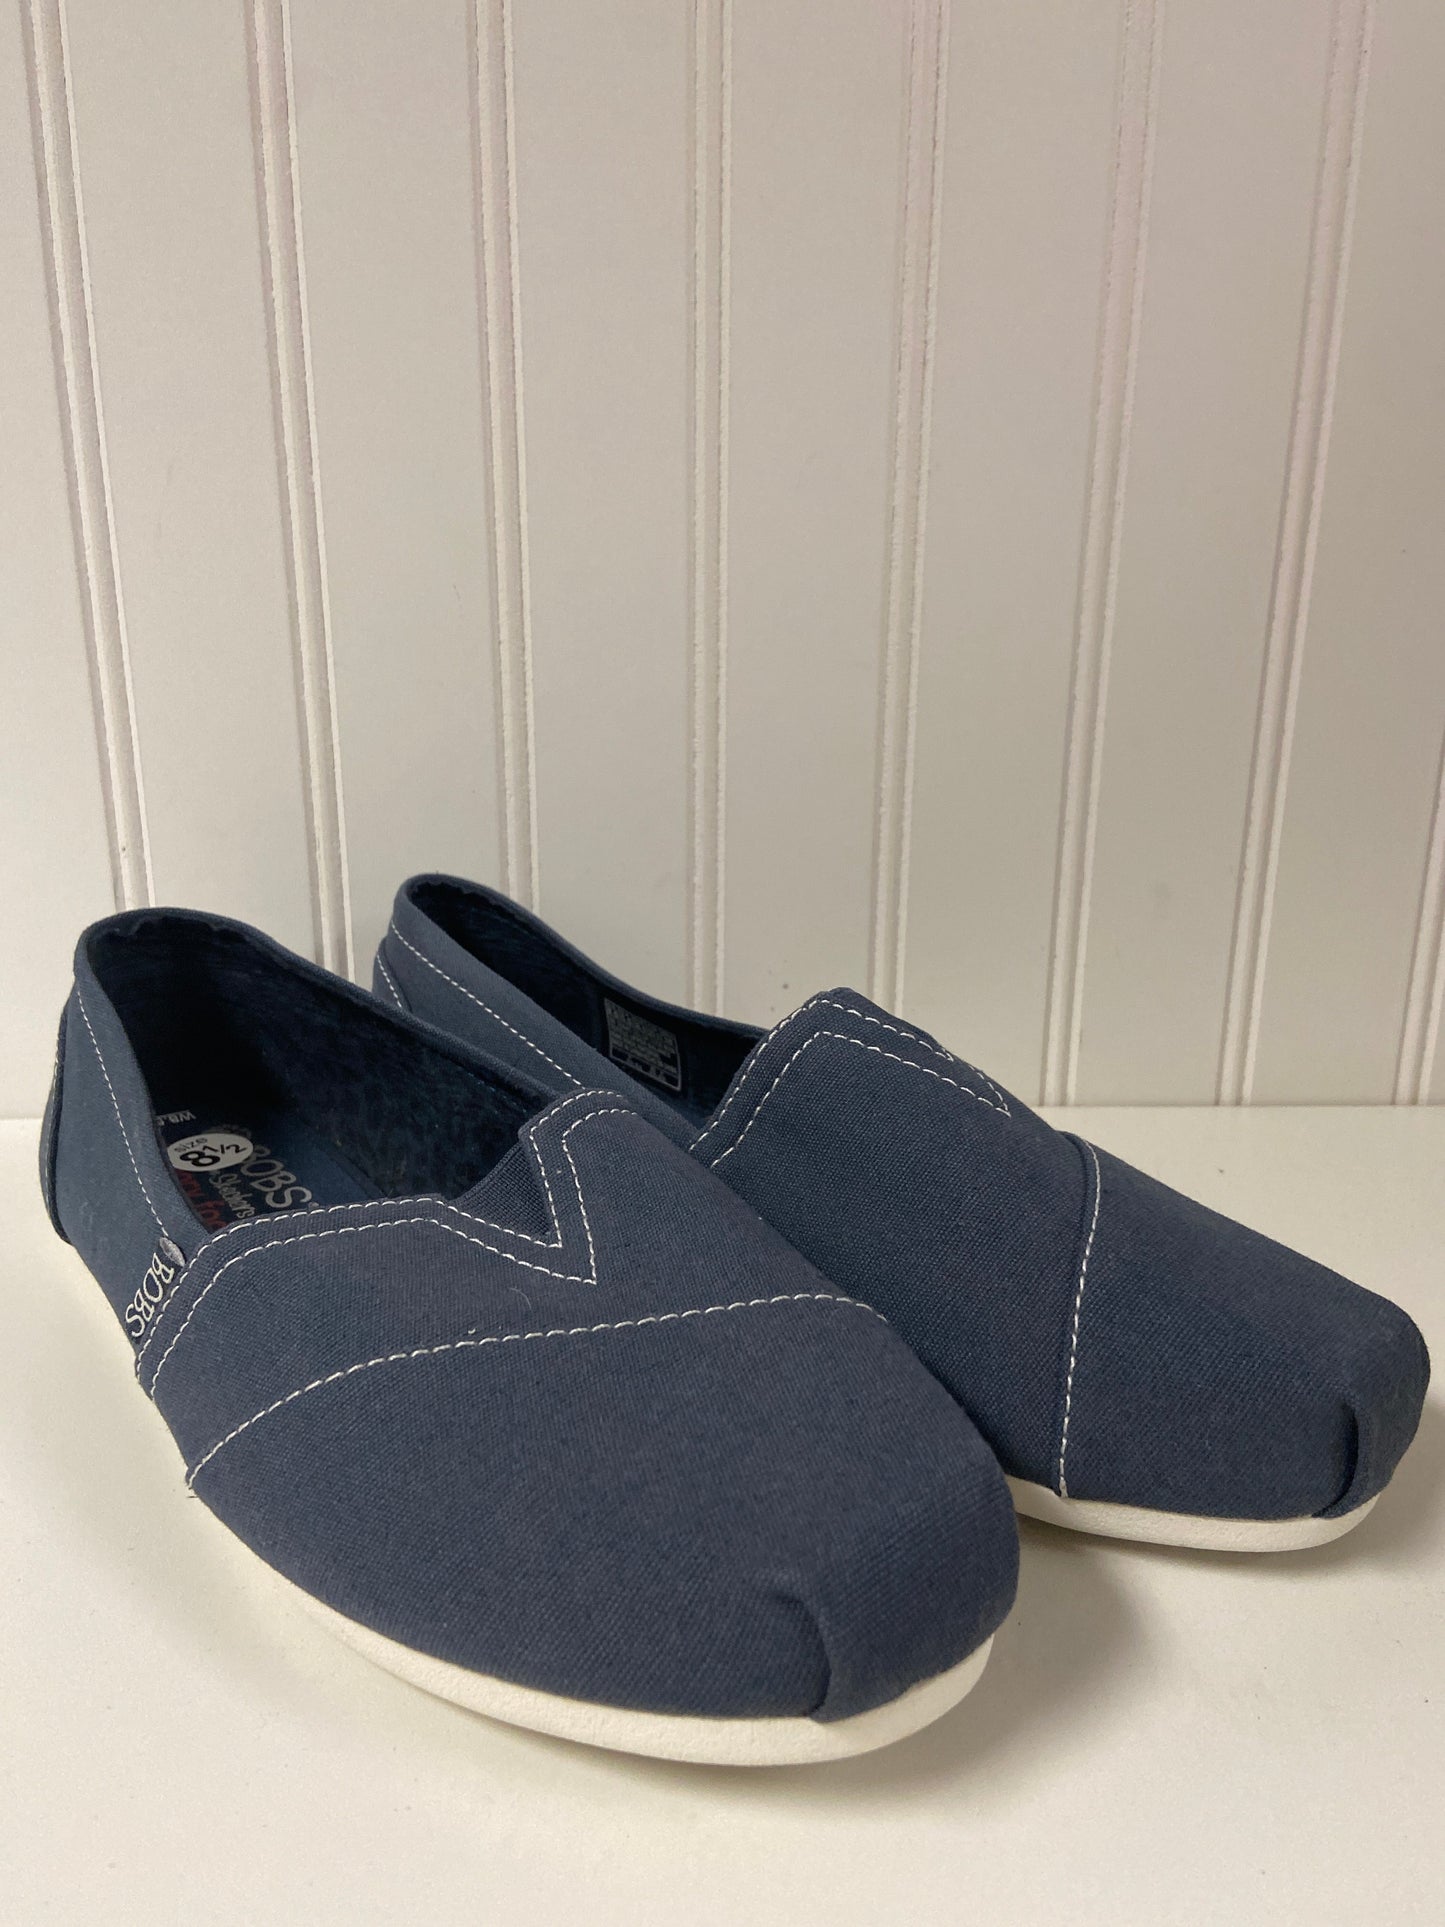 Navy Shoes Flats Bobs, Size 8.5